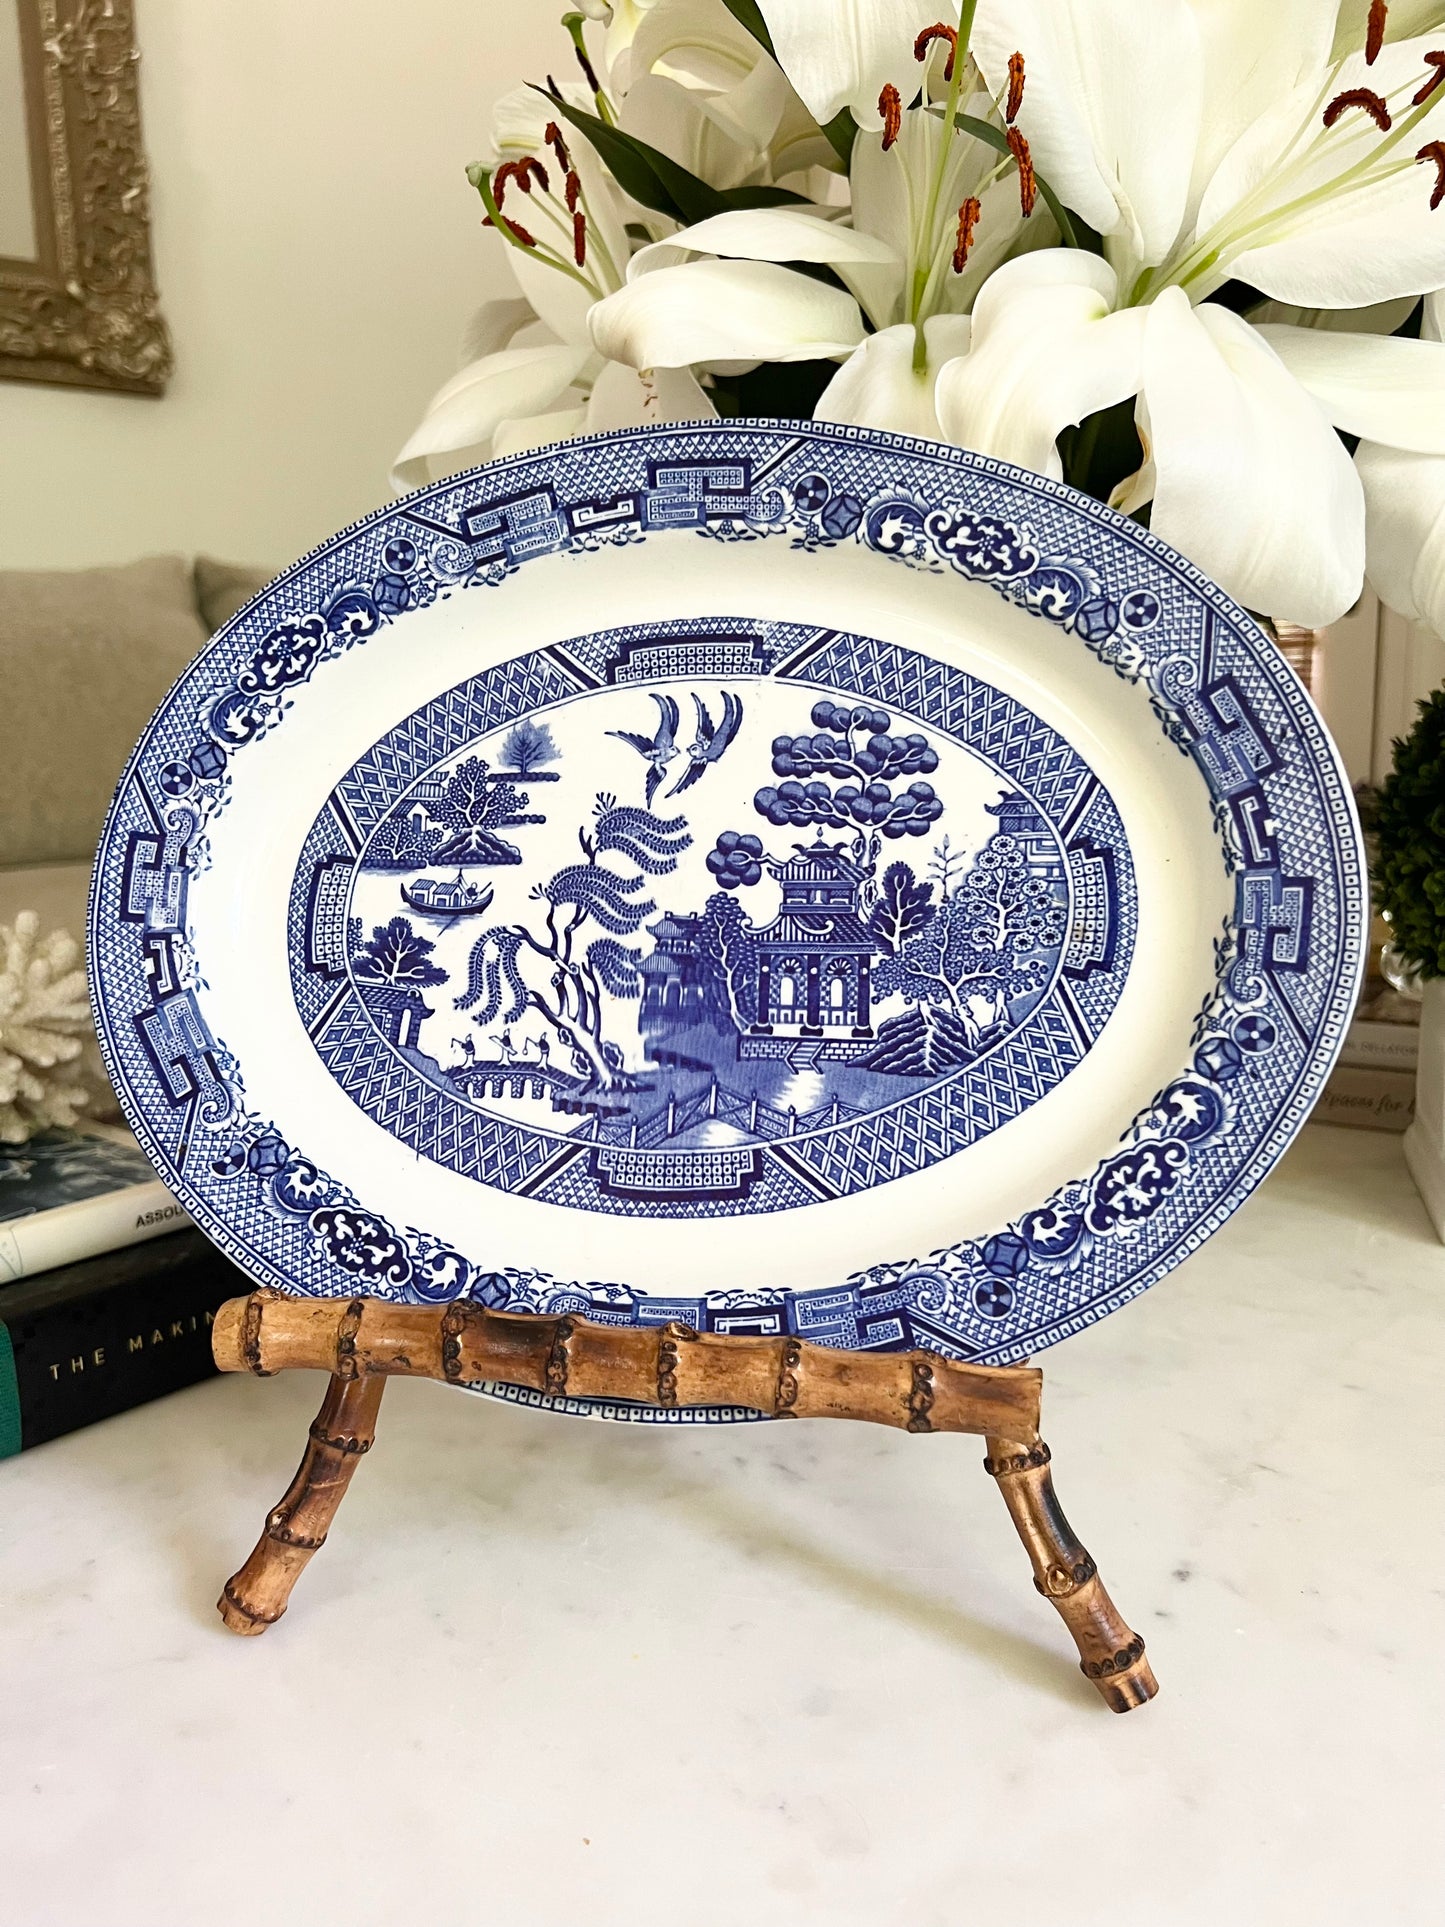 Antique Blue and White Blue Willow Ironstone Platter